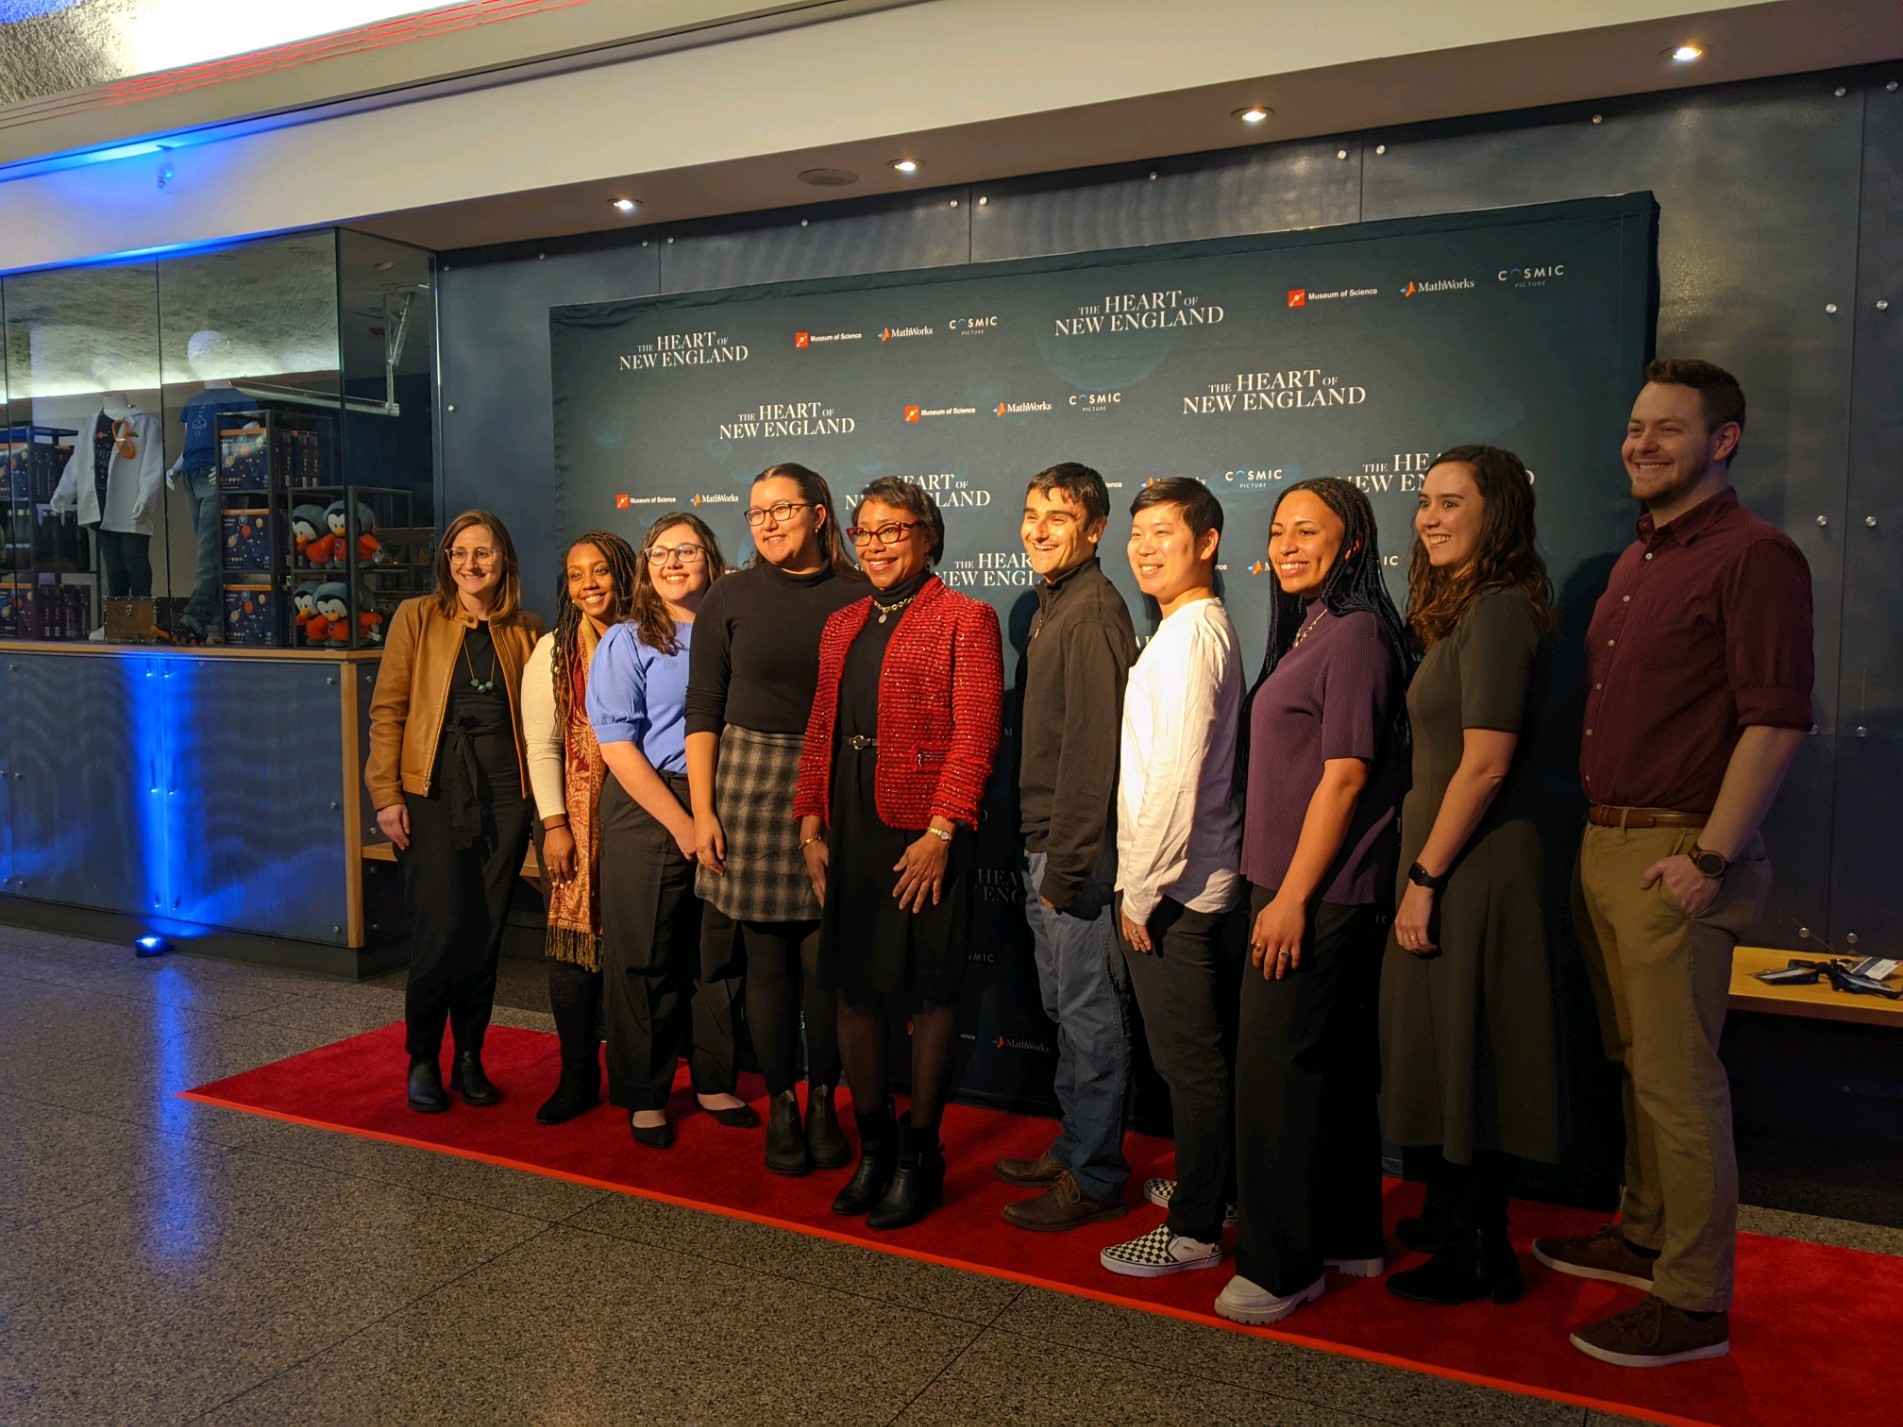 Professor Hammond and some members of the lab pose for a picture on the red carpet at the premiere of "The Heart of New England", which features her story.